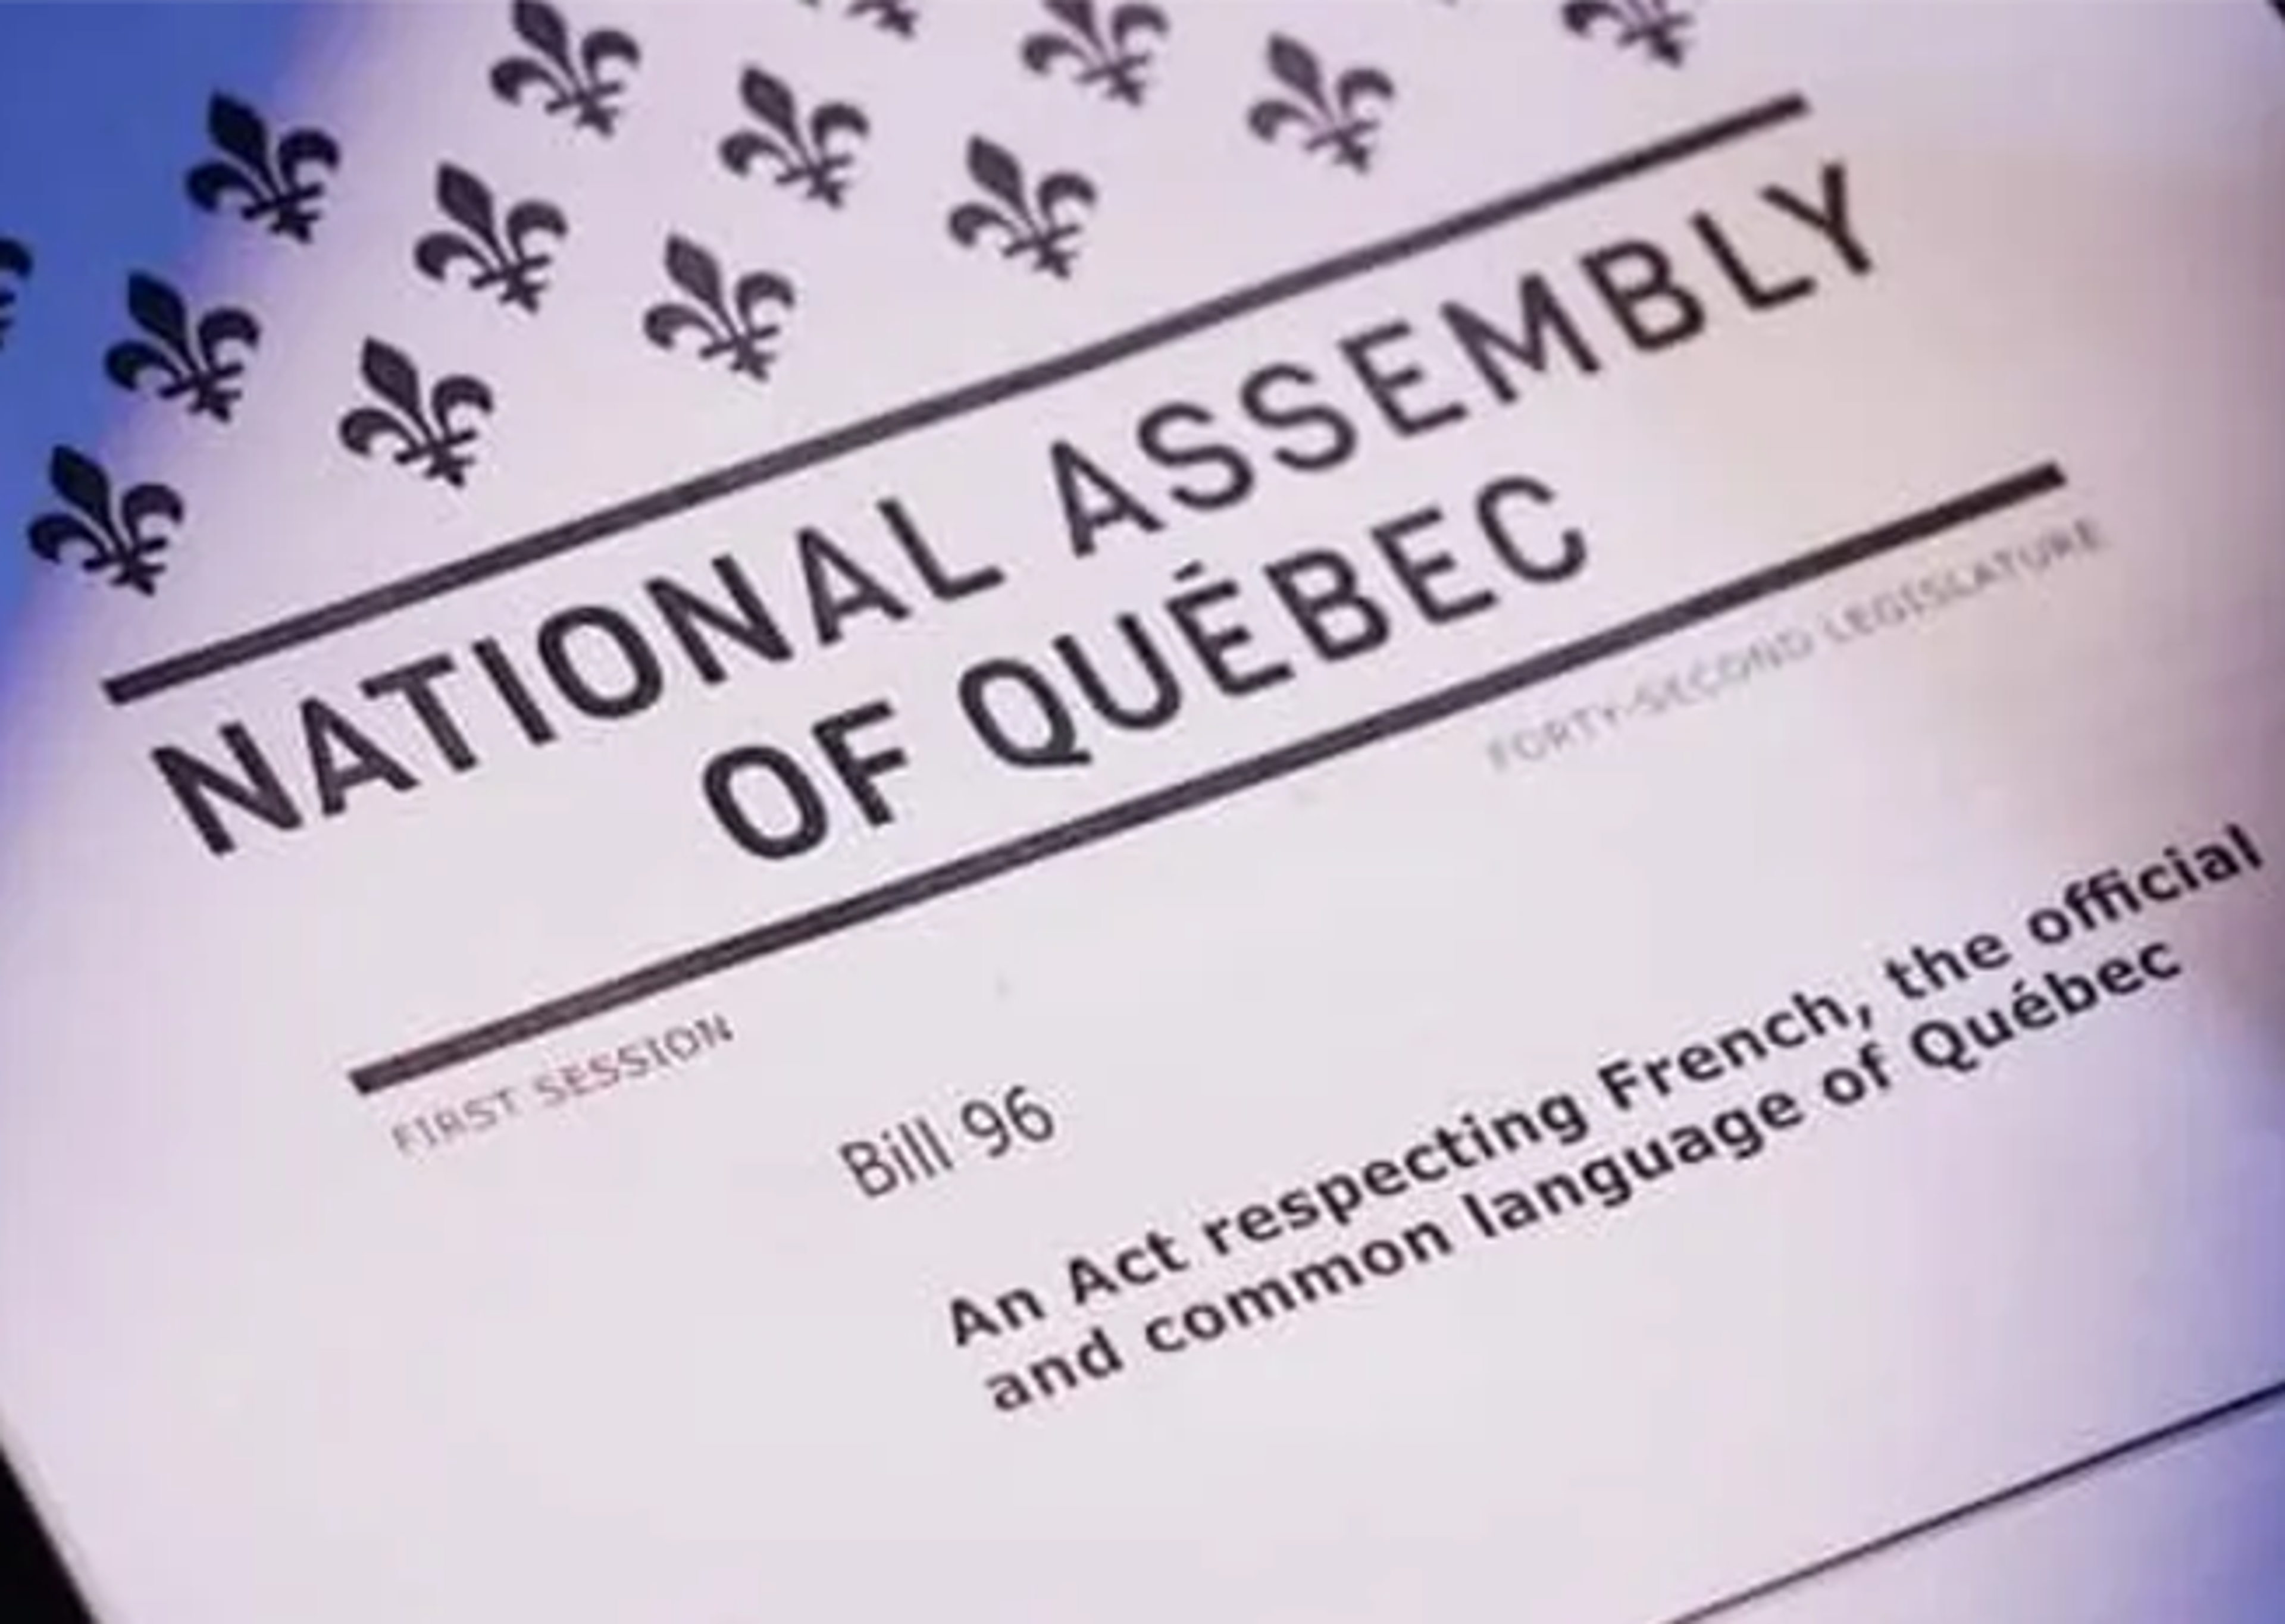 A printed document titled "Bill 96", described as "An Act respecting French, the official and common language of Quebec", from the National Assembly of Quebec.